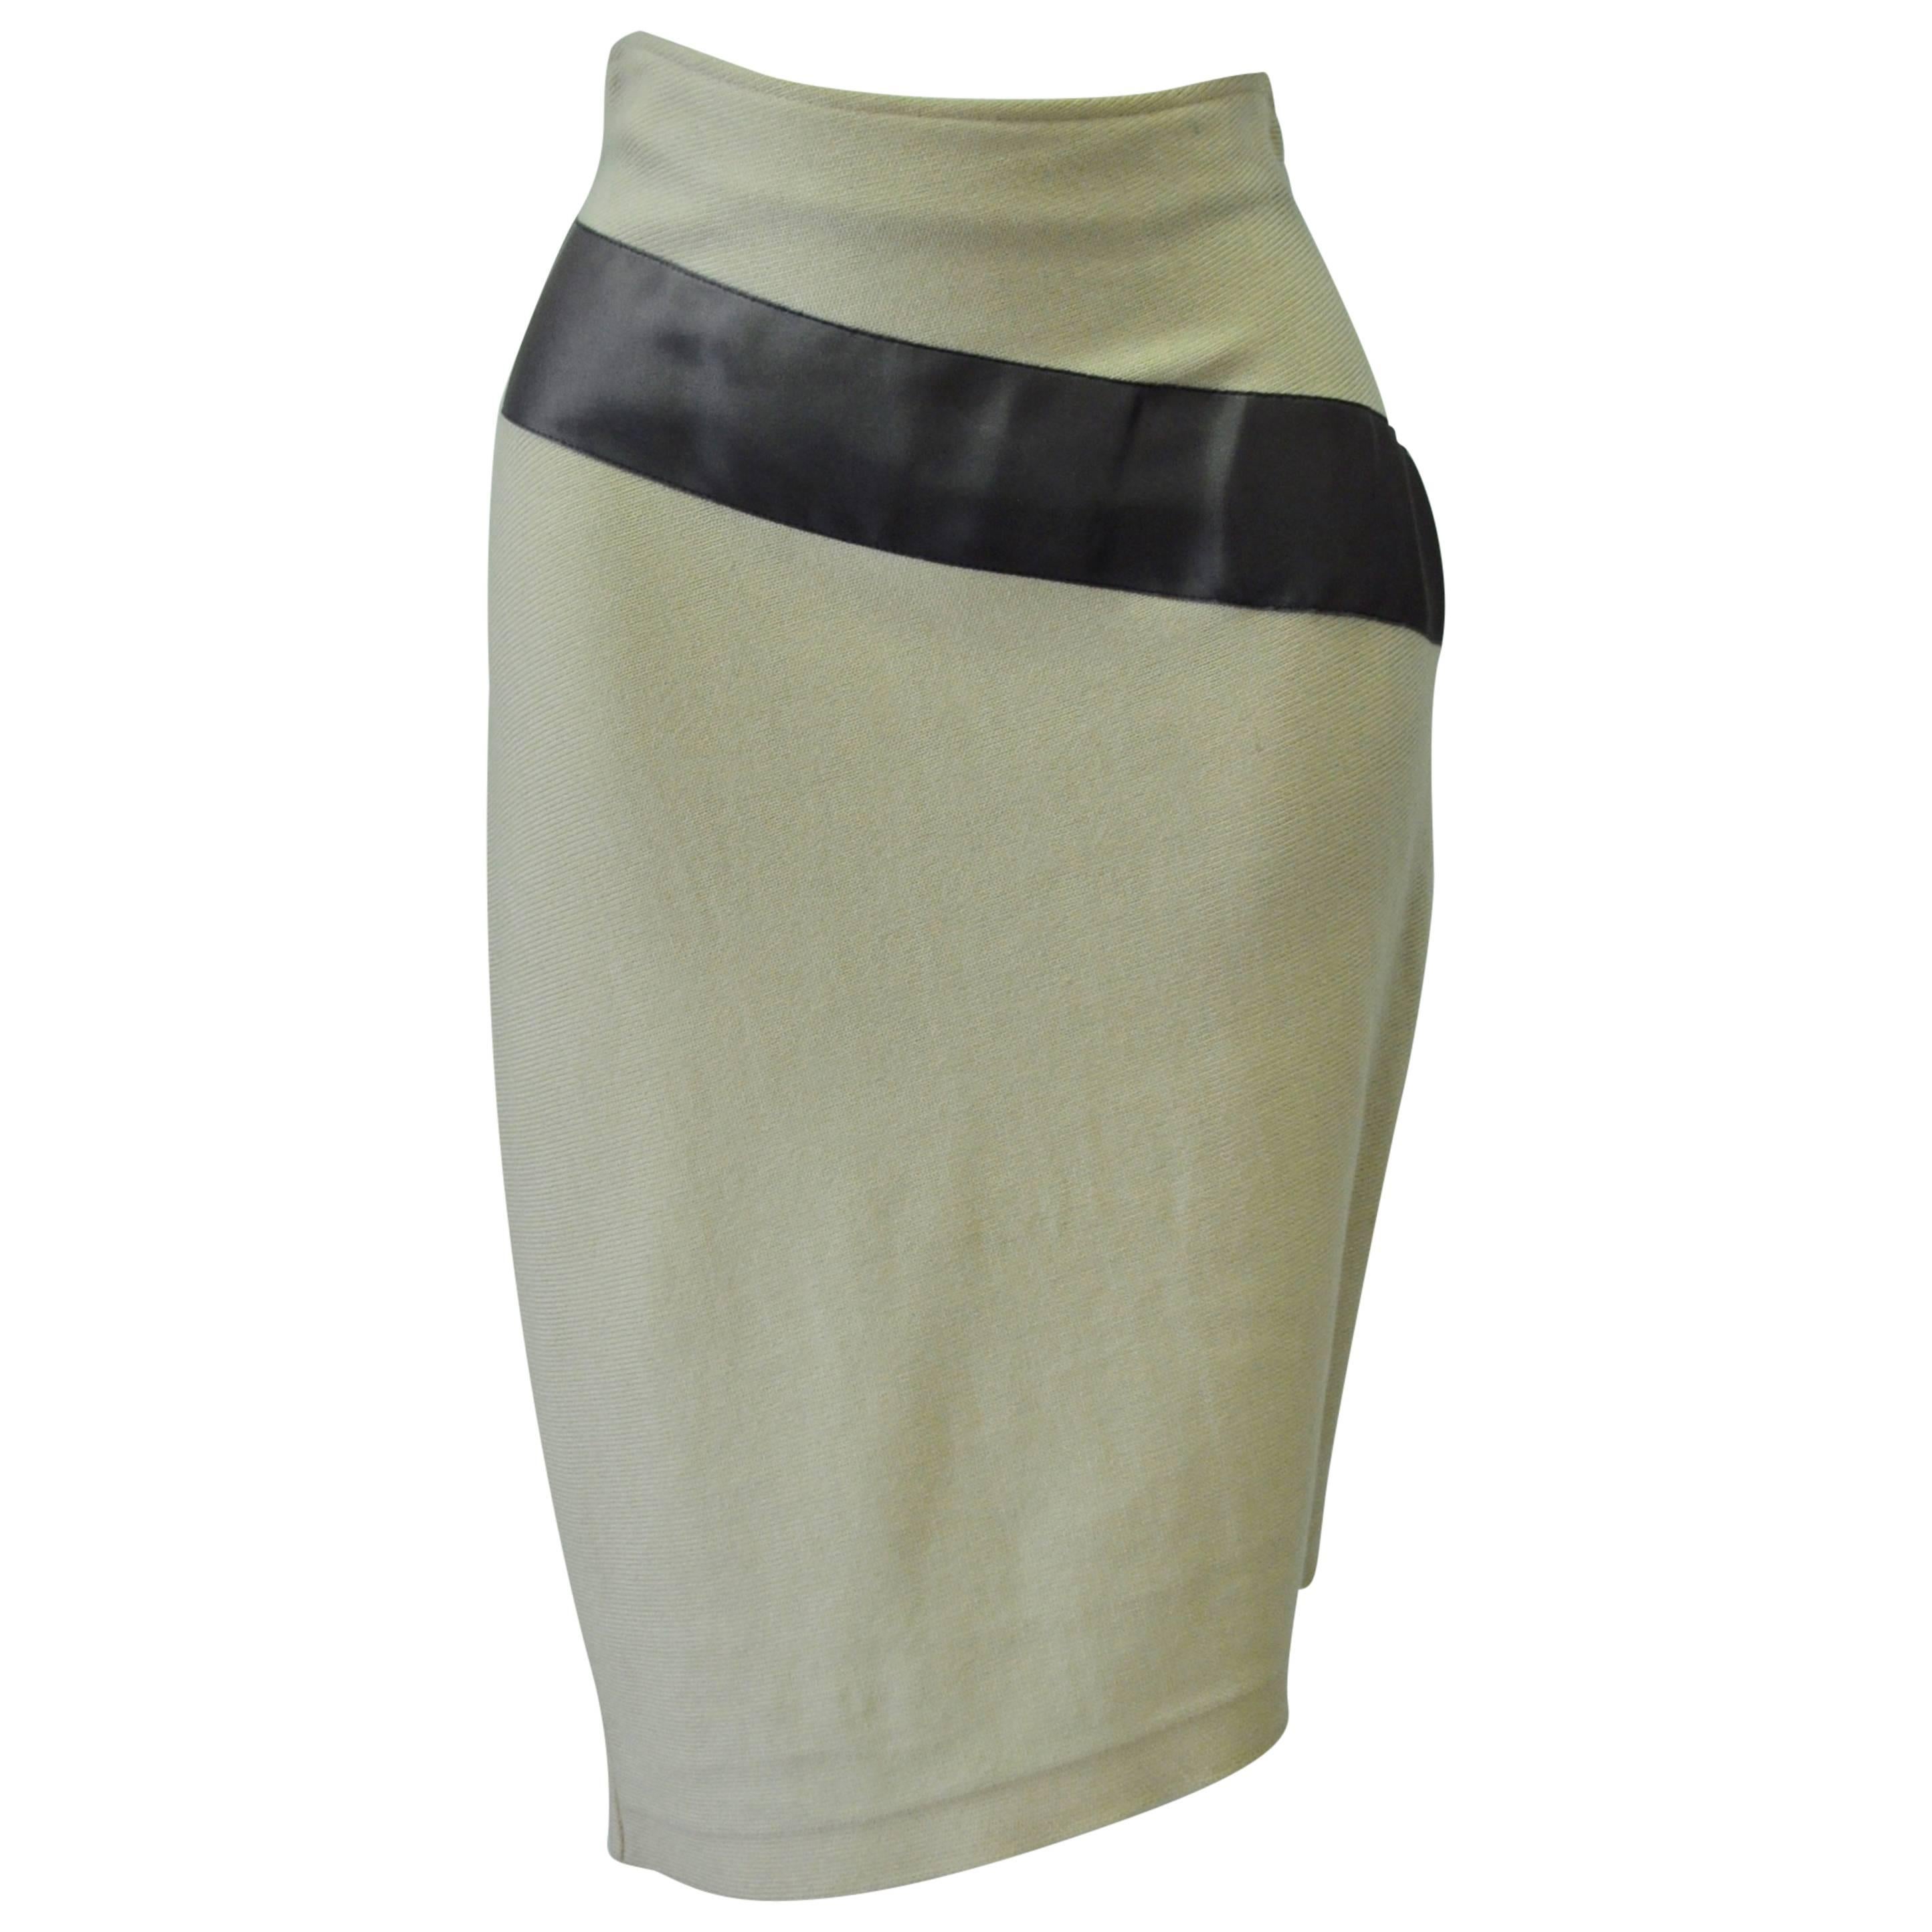 Chic and Unique Gianfranco Ferre Asymmetrical Knit Pencil Skirt For Sale